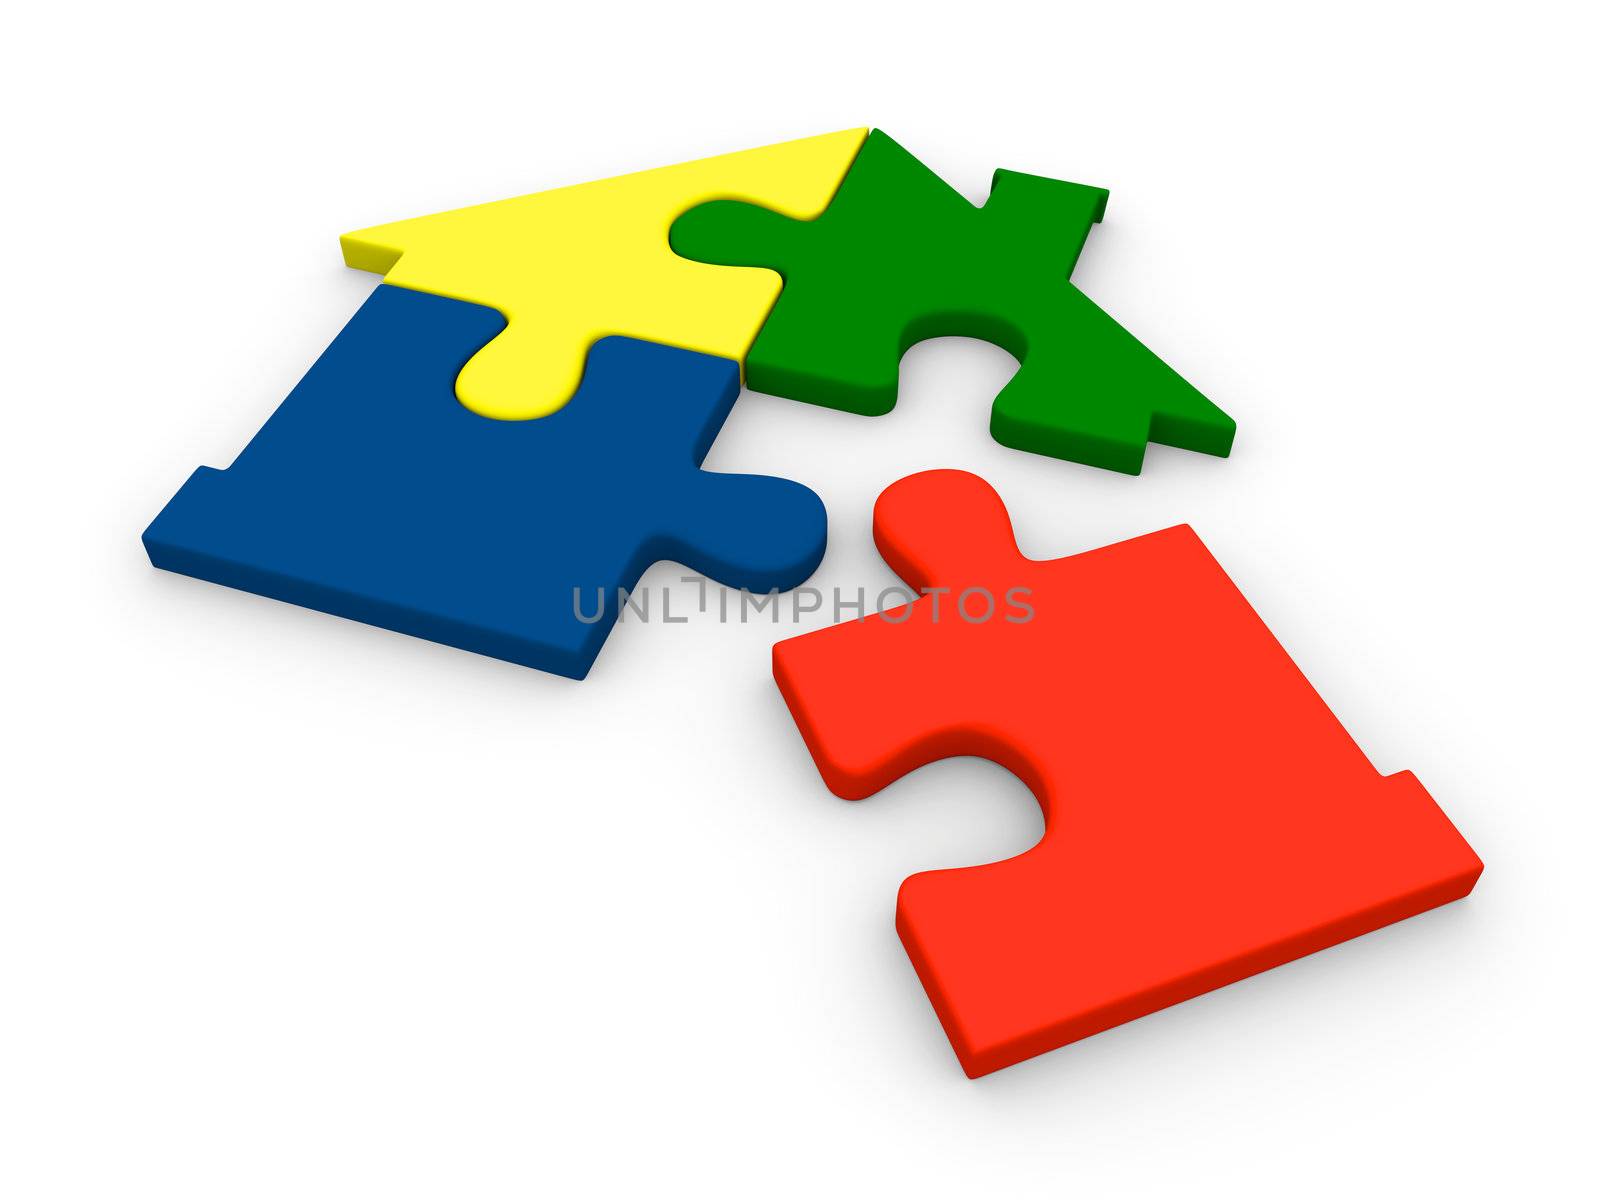 House symbol made of four jigsaw pieces with one not in place